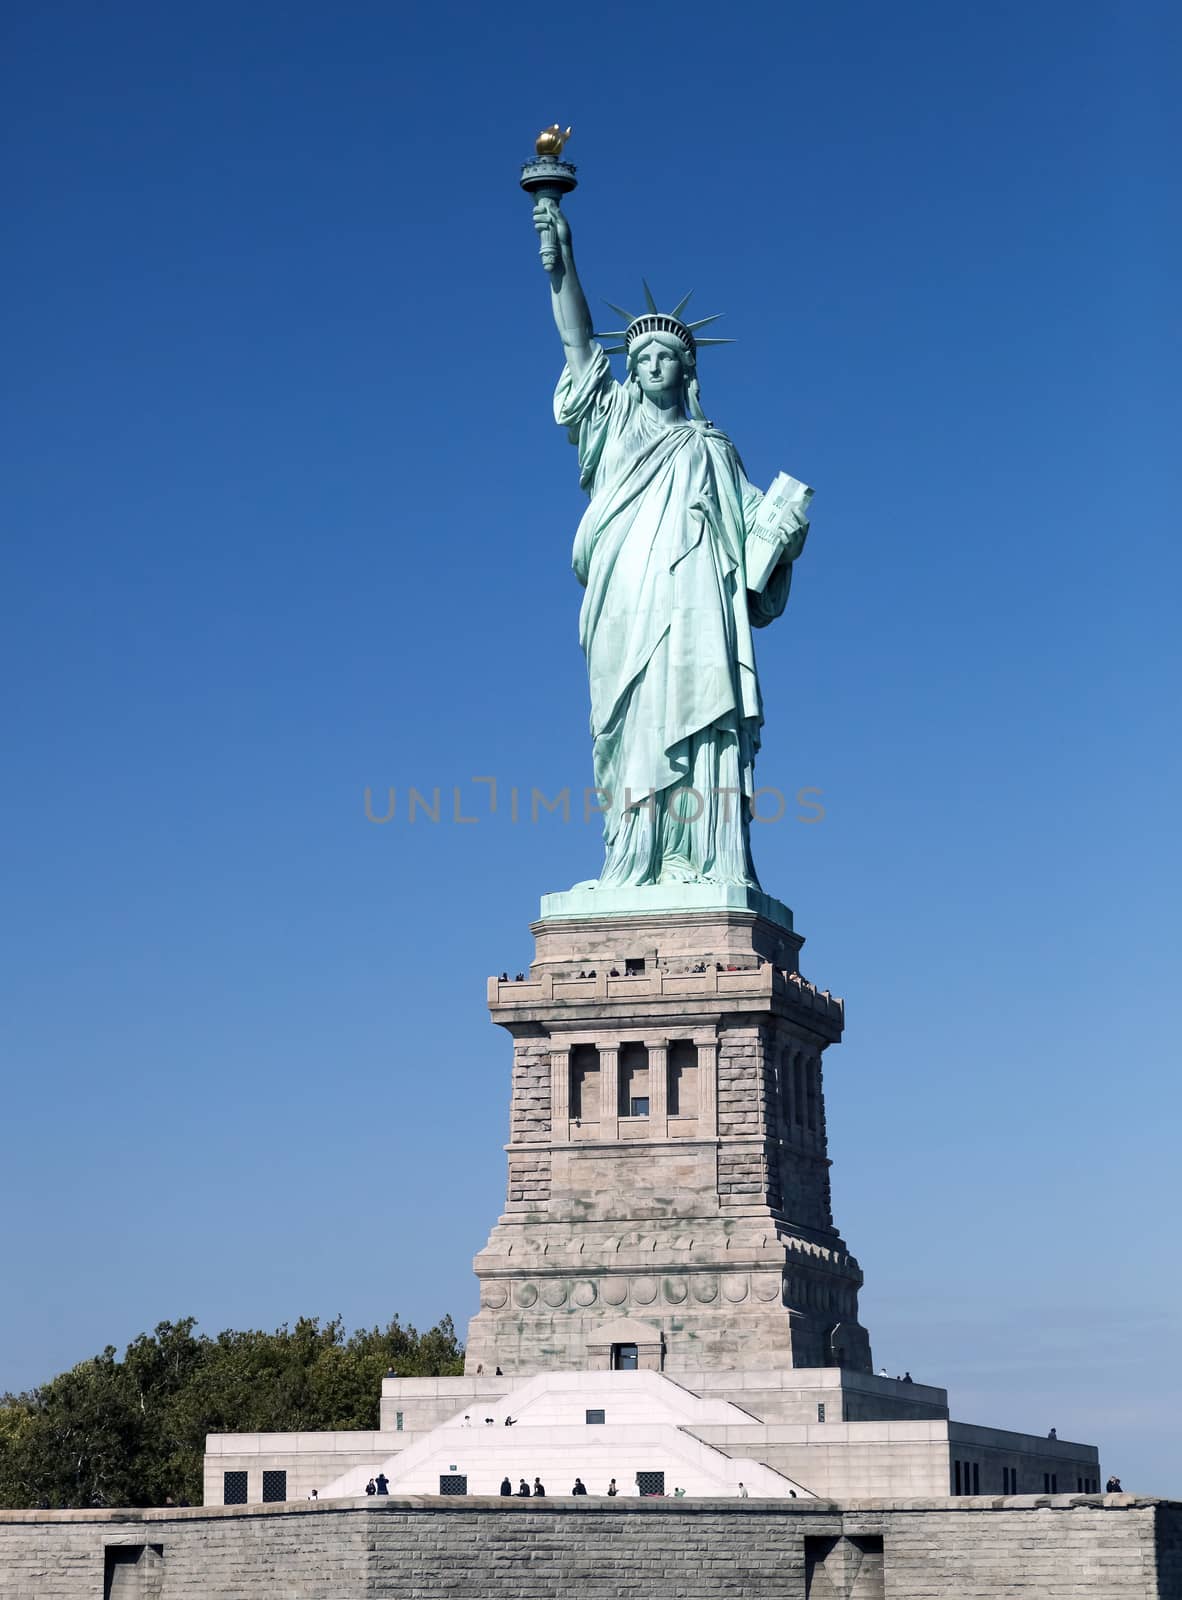 USA, New York, October 6, 2014: Statue of Liberty at New York City is given the USA by France in 1885, standing at Liberty Island at Hudson river in New York.